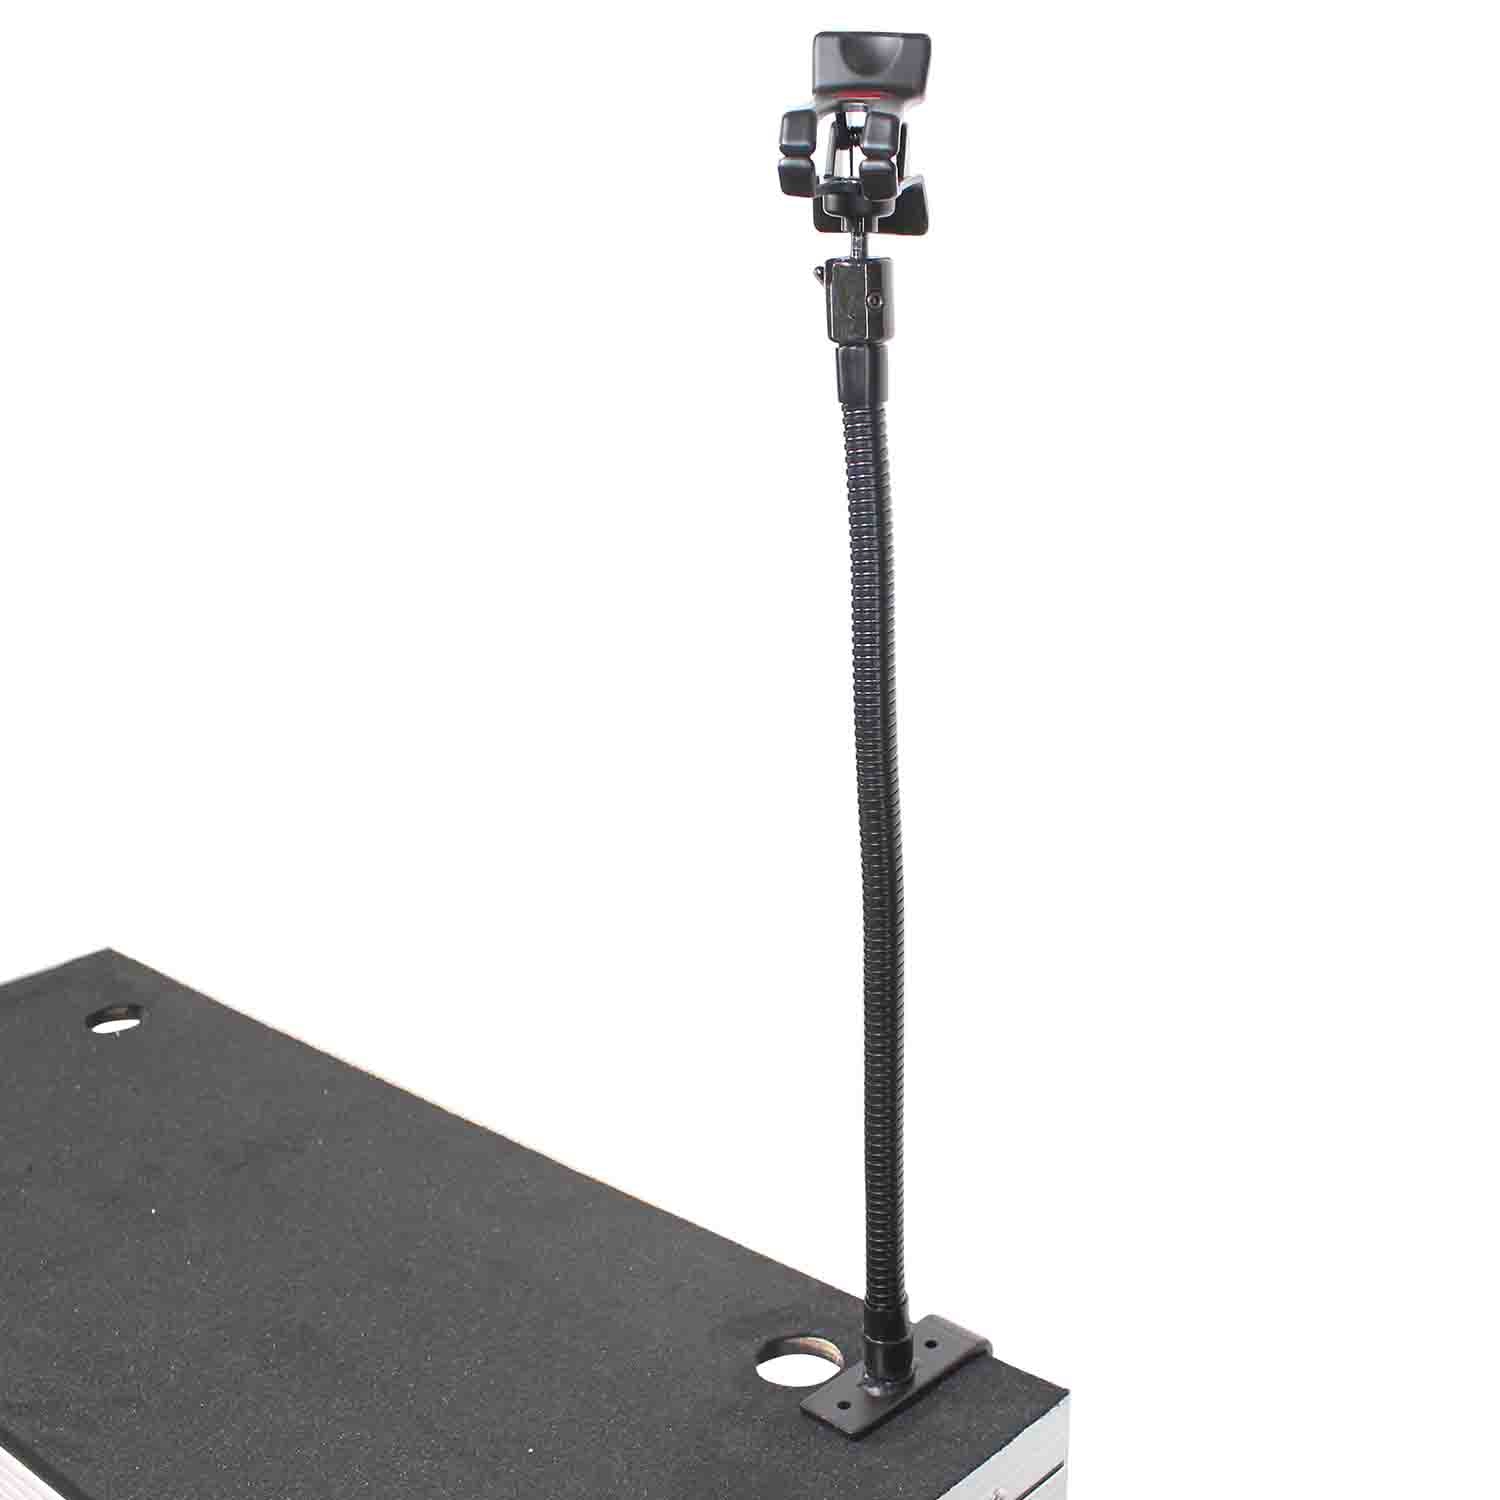 ProX X-MOBICP18 Cellphone Holder Selfie Stick with Table Stand Tripod Clamp and Case - Hollywood DJ